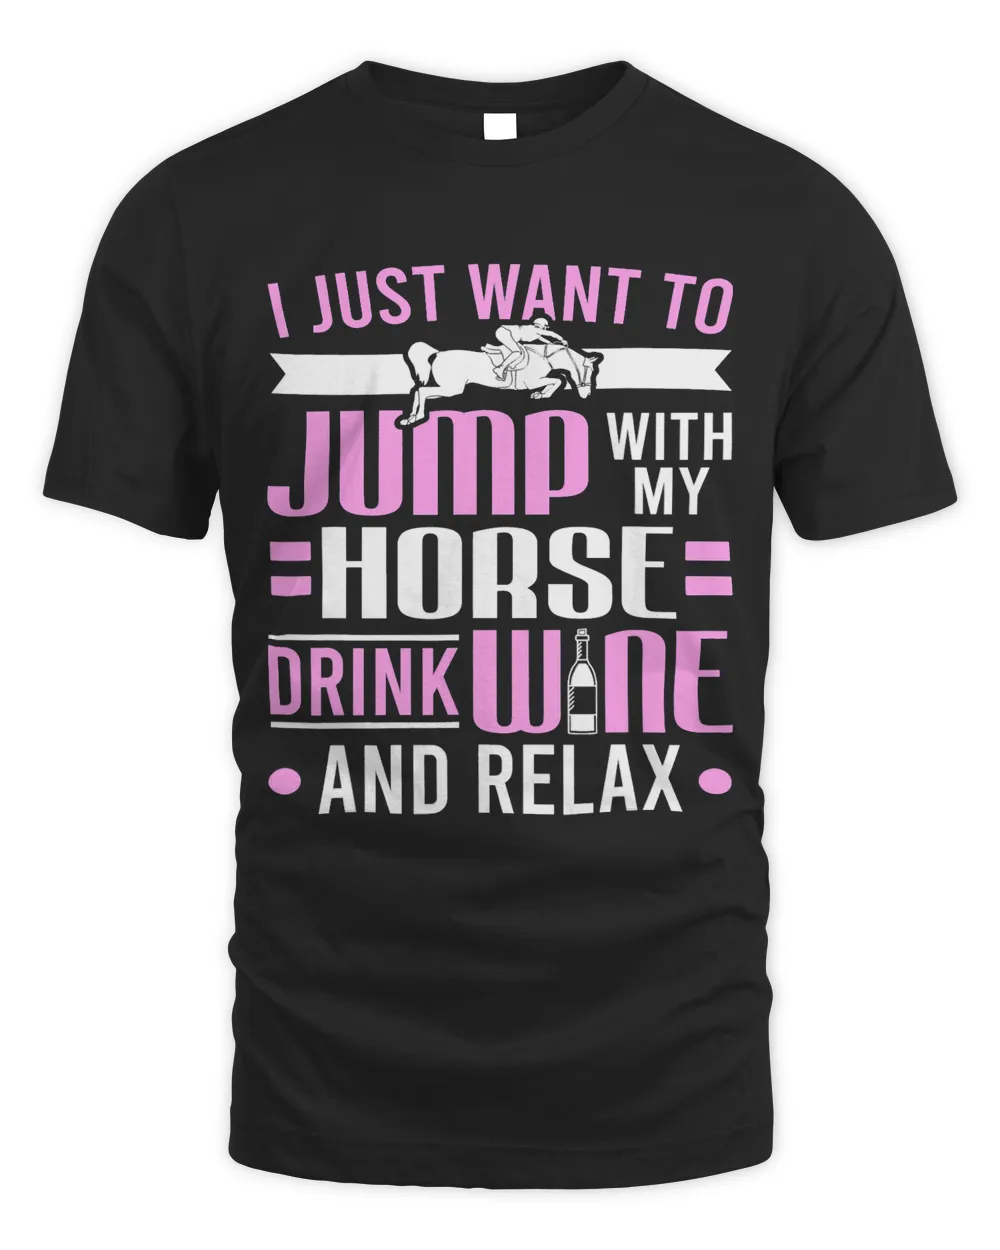 Horse Show Jumper I Just Want To Jump Show Jumping